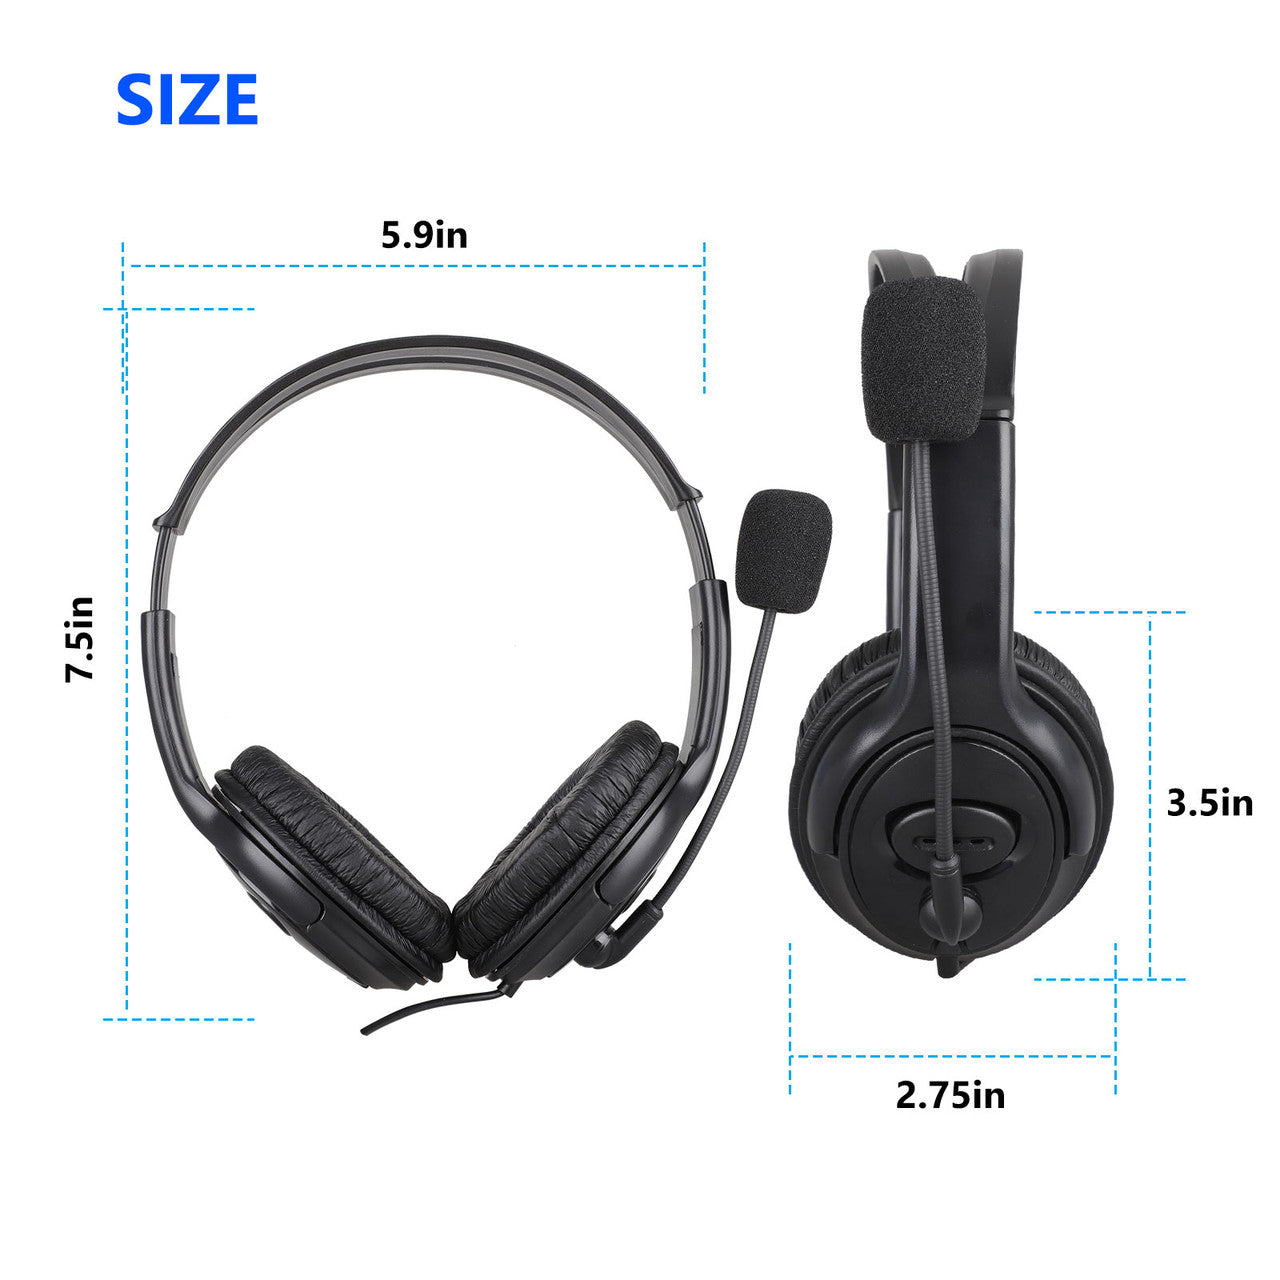 Wired Stereo Gaming Headset for PS4, PC, Xbox One Controller Laptop Mac